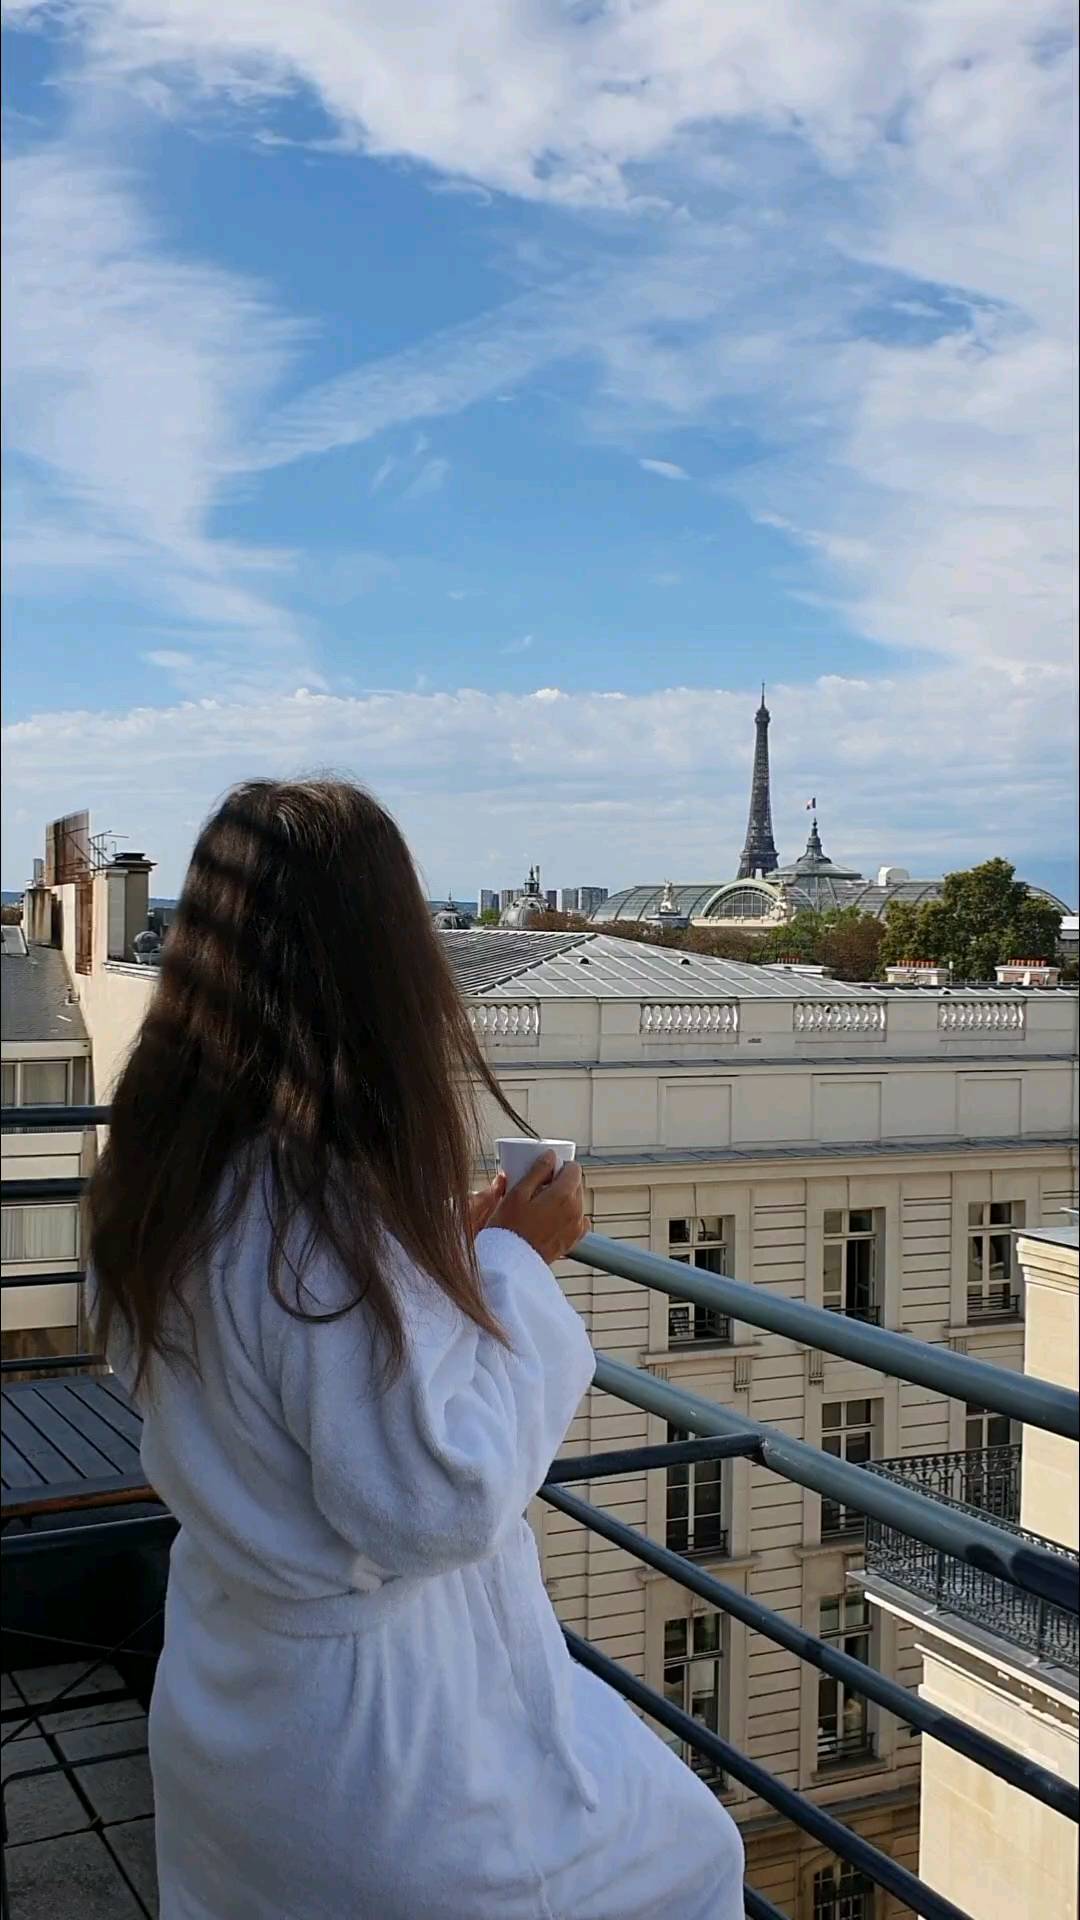 • PARIS VIBES •
🇫🇷 Ce genre de réveil avec vue 😍
Bon en vrai ce matin je me réveille à Toulouse... et vous, dans quelle ville vous ouvrez les yeux ce matin ? ☕
-----------------------------------------------------------------------------------
🇺🇲 This kind of morning with a view 😍
Actually today I'm waking up in Toulouse... Which city are you guys opening your eyes to this morning? ☕
.
.
.
.
. 
#FoodieBoulieInParis #photography #foodie #ootd #fashion #robe #body #piercing #summer #travel #voyage #wanderlust #nutrition #fitness #fitgirl #healthy #lifestyle #coffee #cafe #toulouse #bordeaux #lyon #marseille #france #frenchie #hair #brushing #hotel #toureiffel #eiffeltower